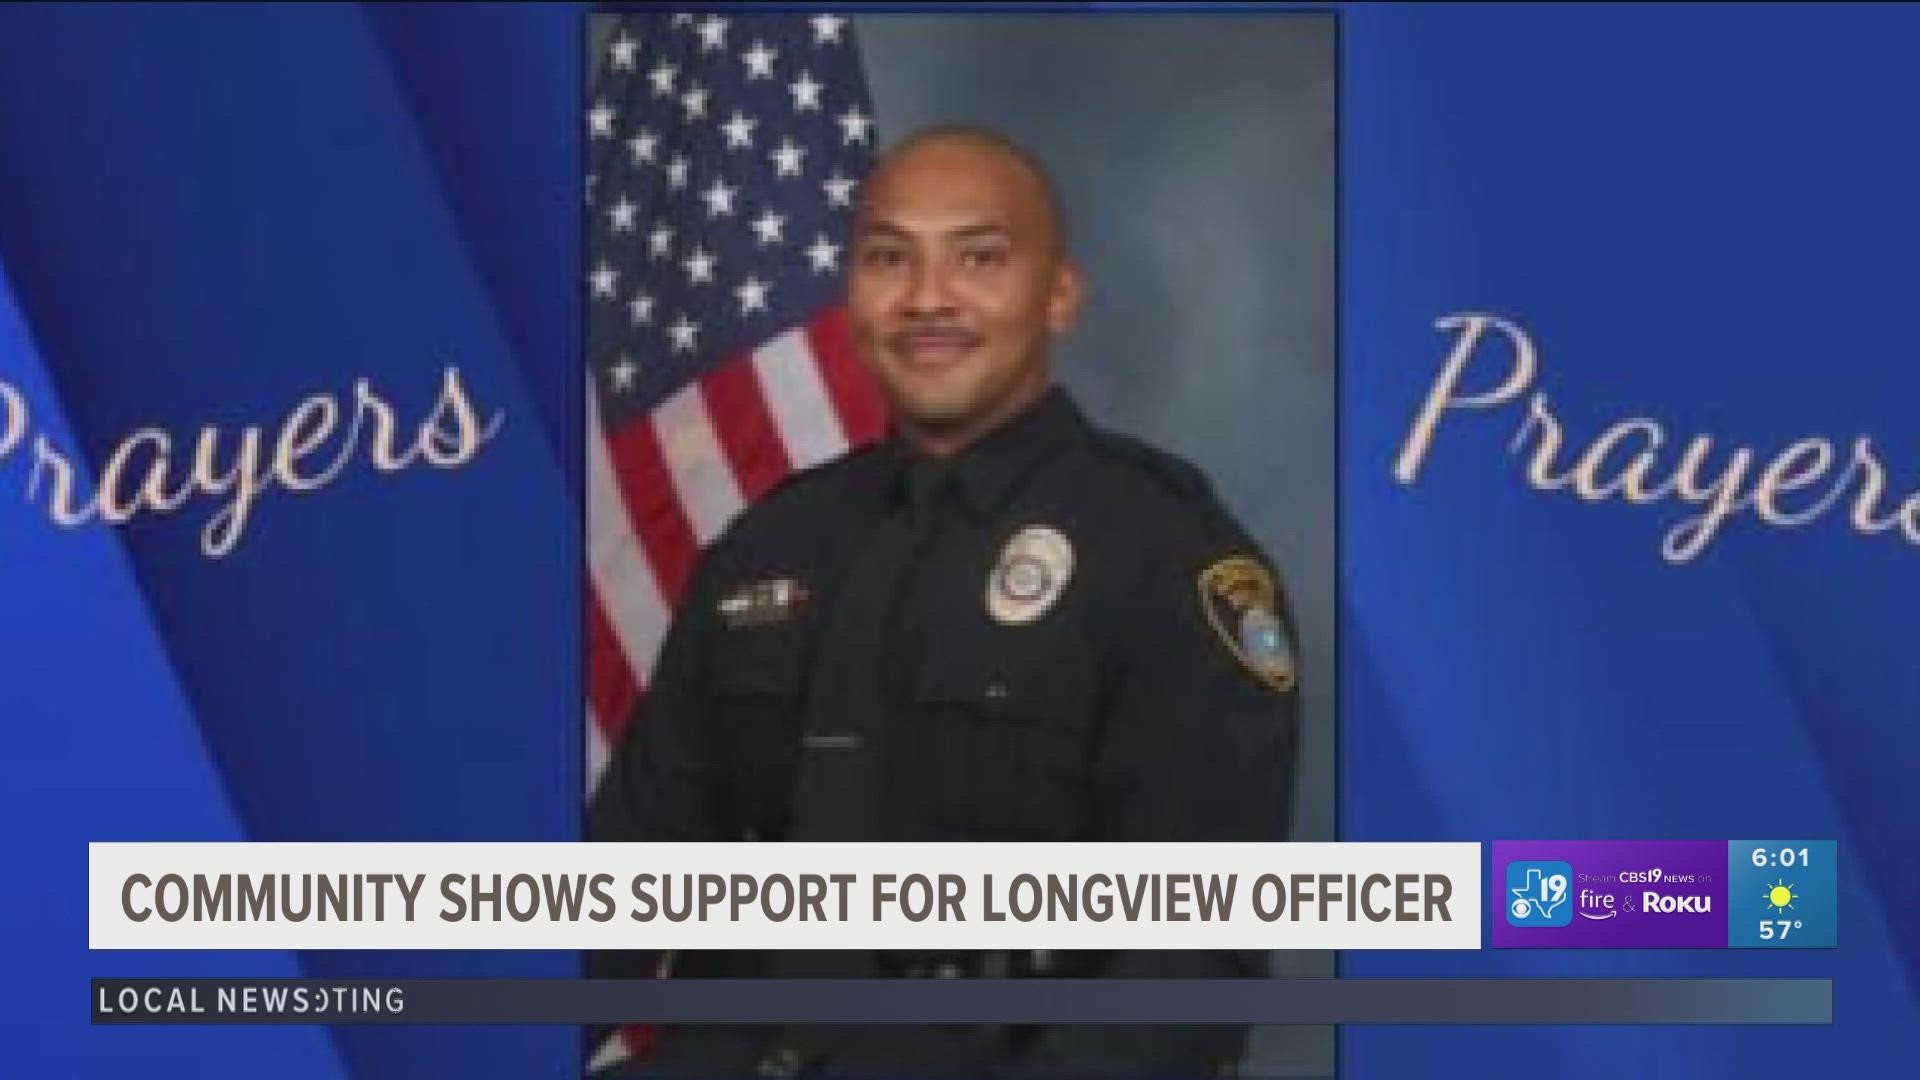 A Longview Police Officer and former marine, has fought battles his whole life. Now, he’s fighting another tough battle.